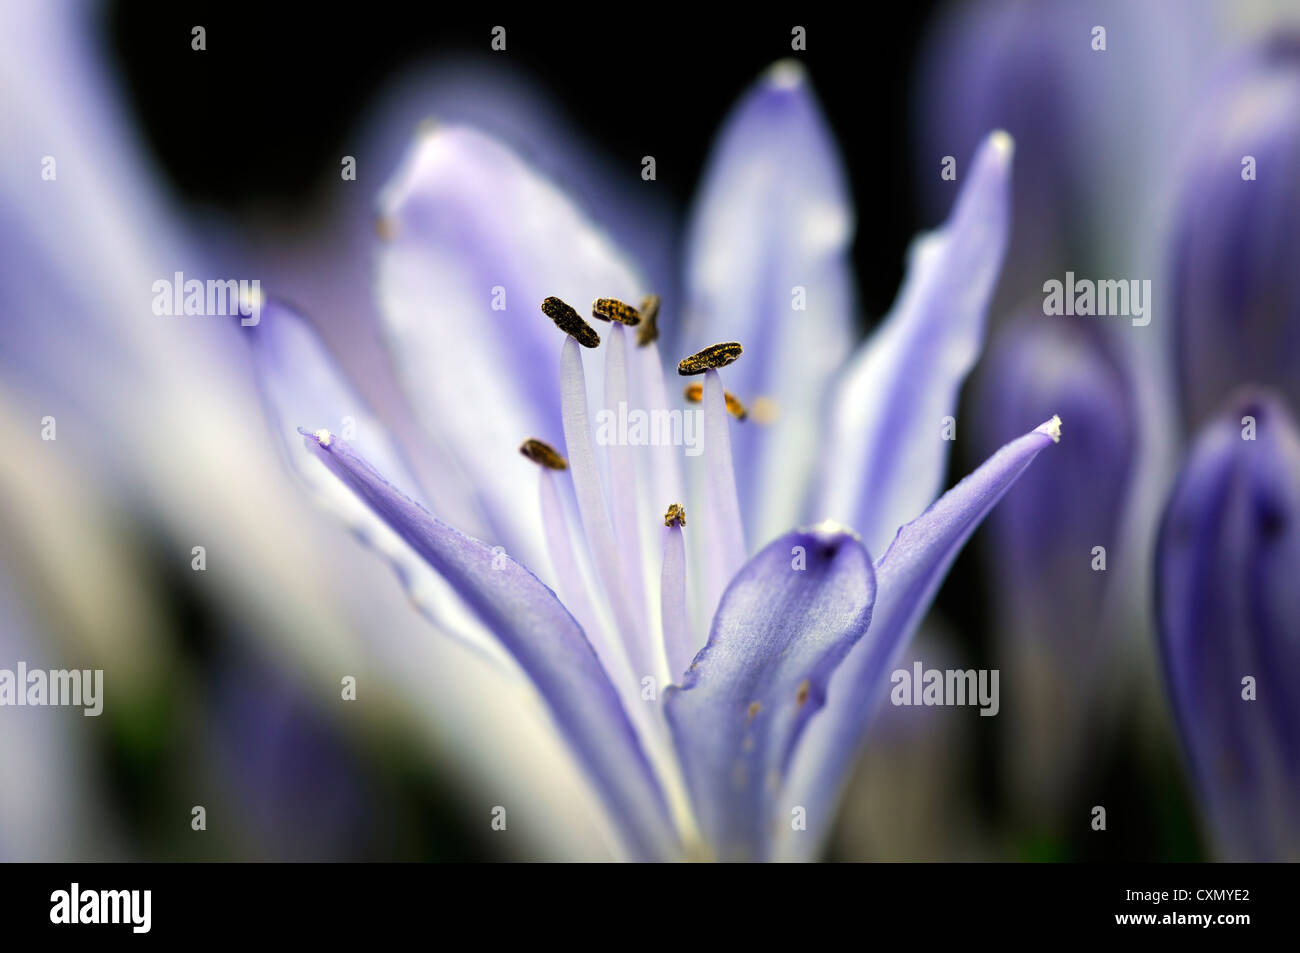 agapanthus africanus blue lily flowers flowering blooms closeups close-ups ups graphic perennials african lily backlit glow Stock Photo